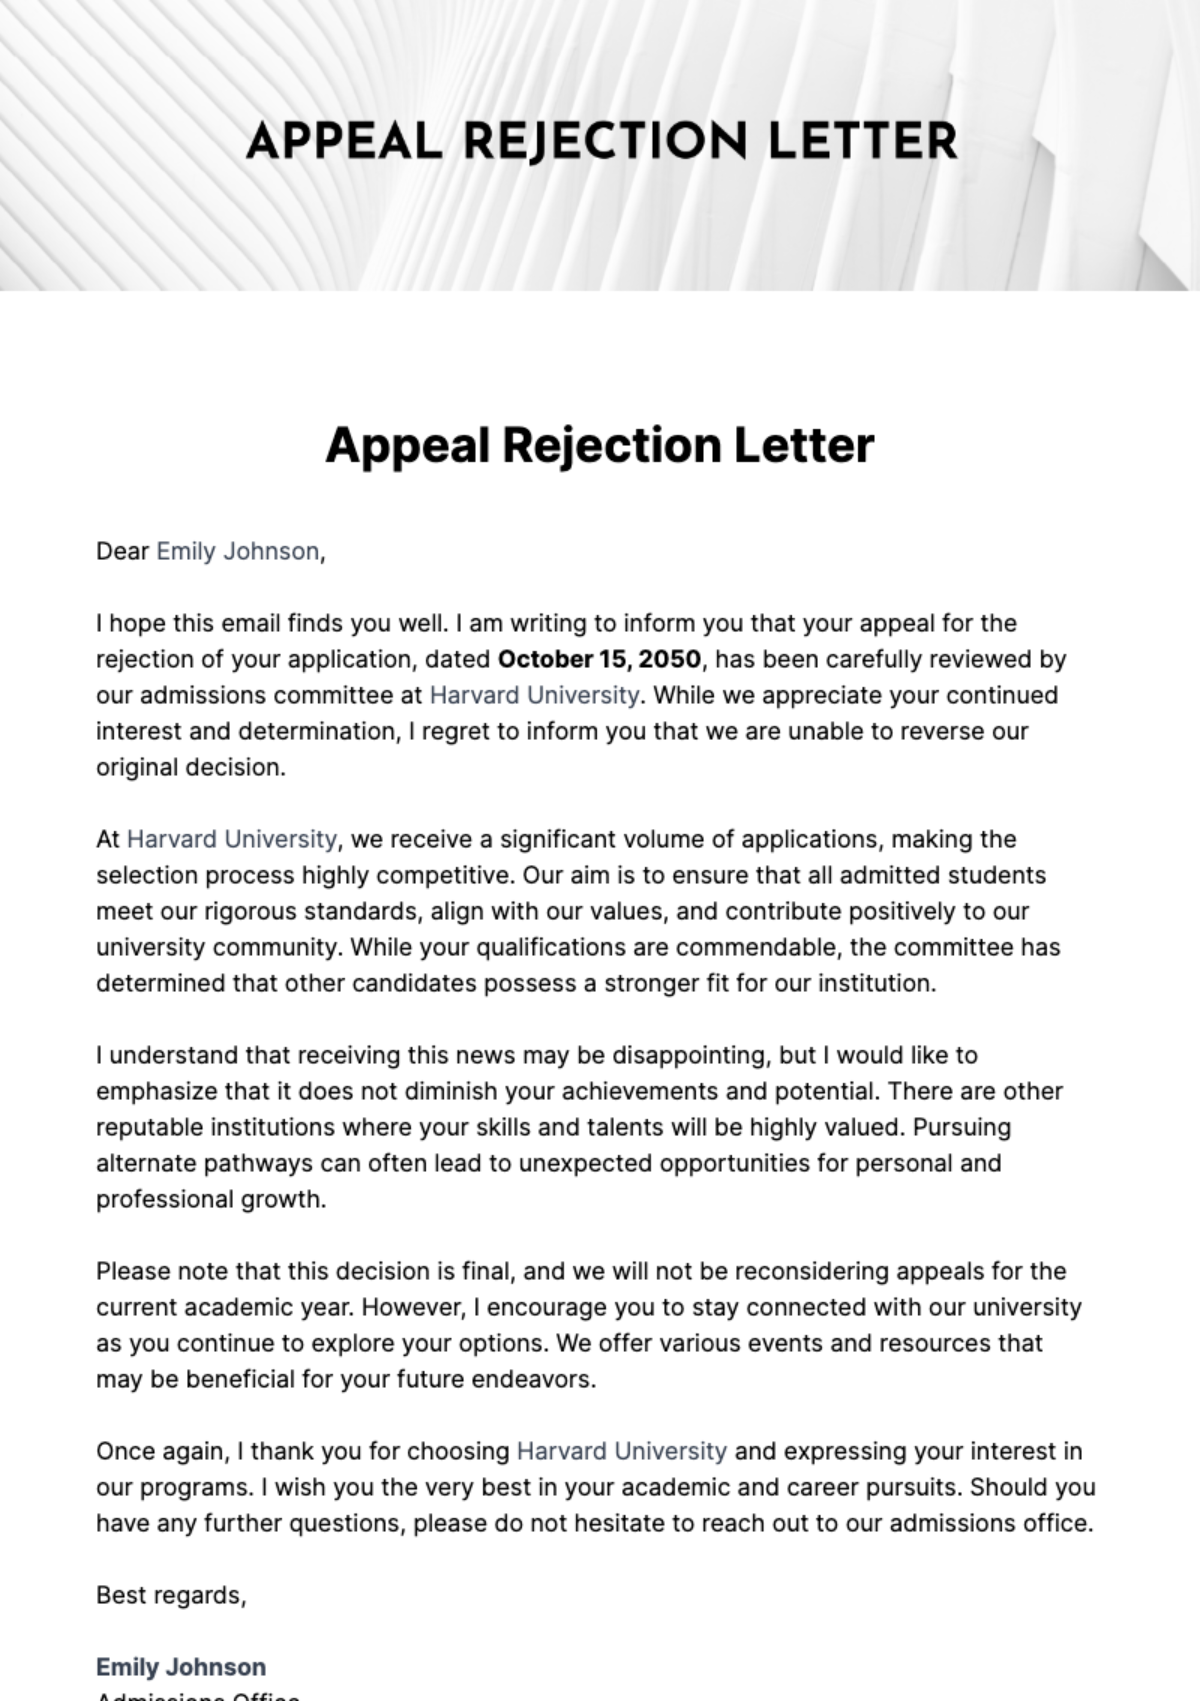 Free Appeal Rejection Letter Template